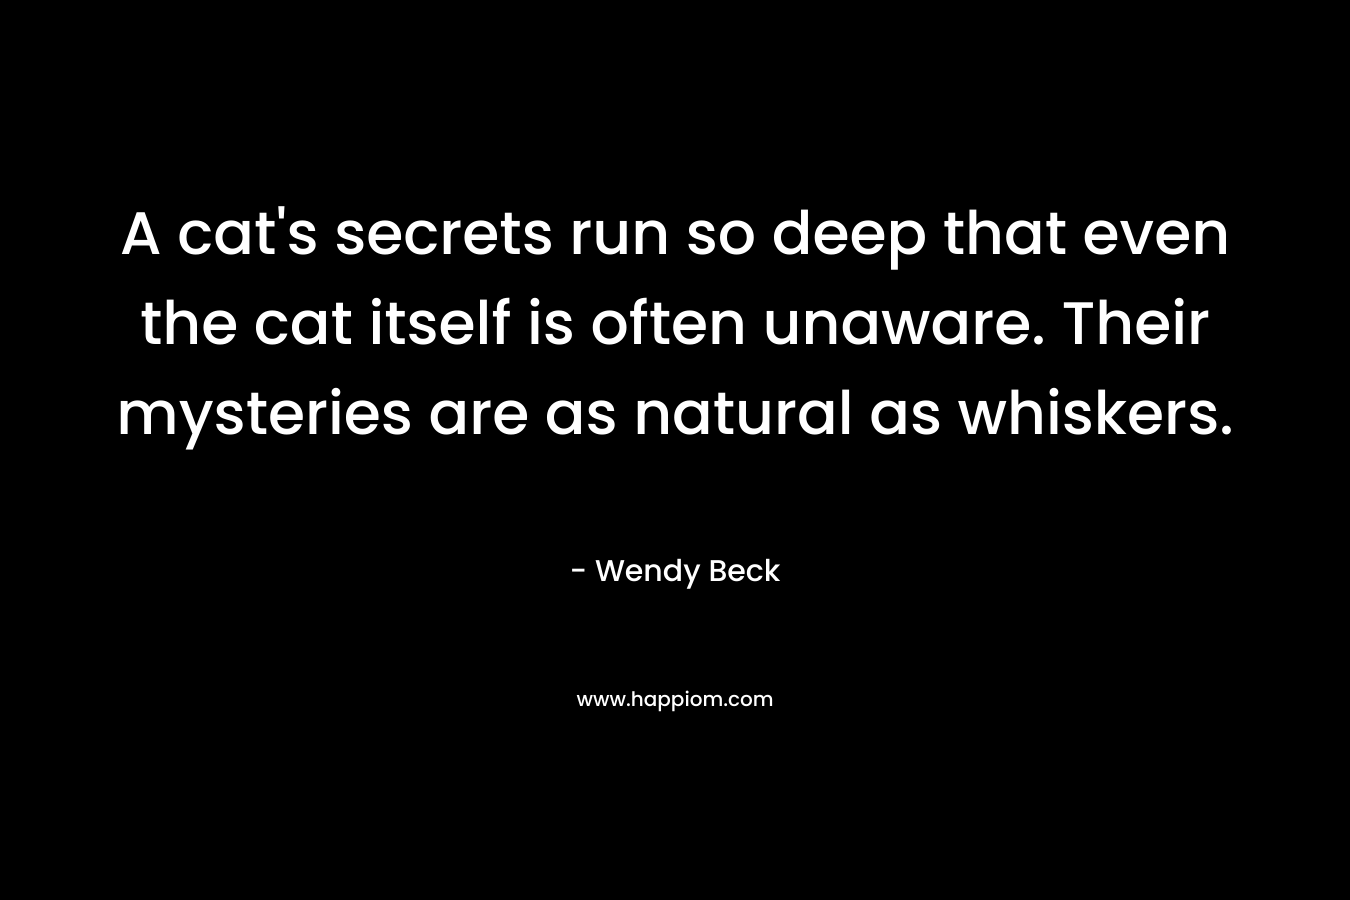 A cat’s secrets run so deep that even the cat itself is often unaware. Their mysteries are as natural as whiskers. – Wendy Beck